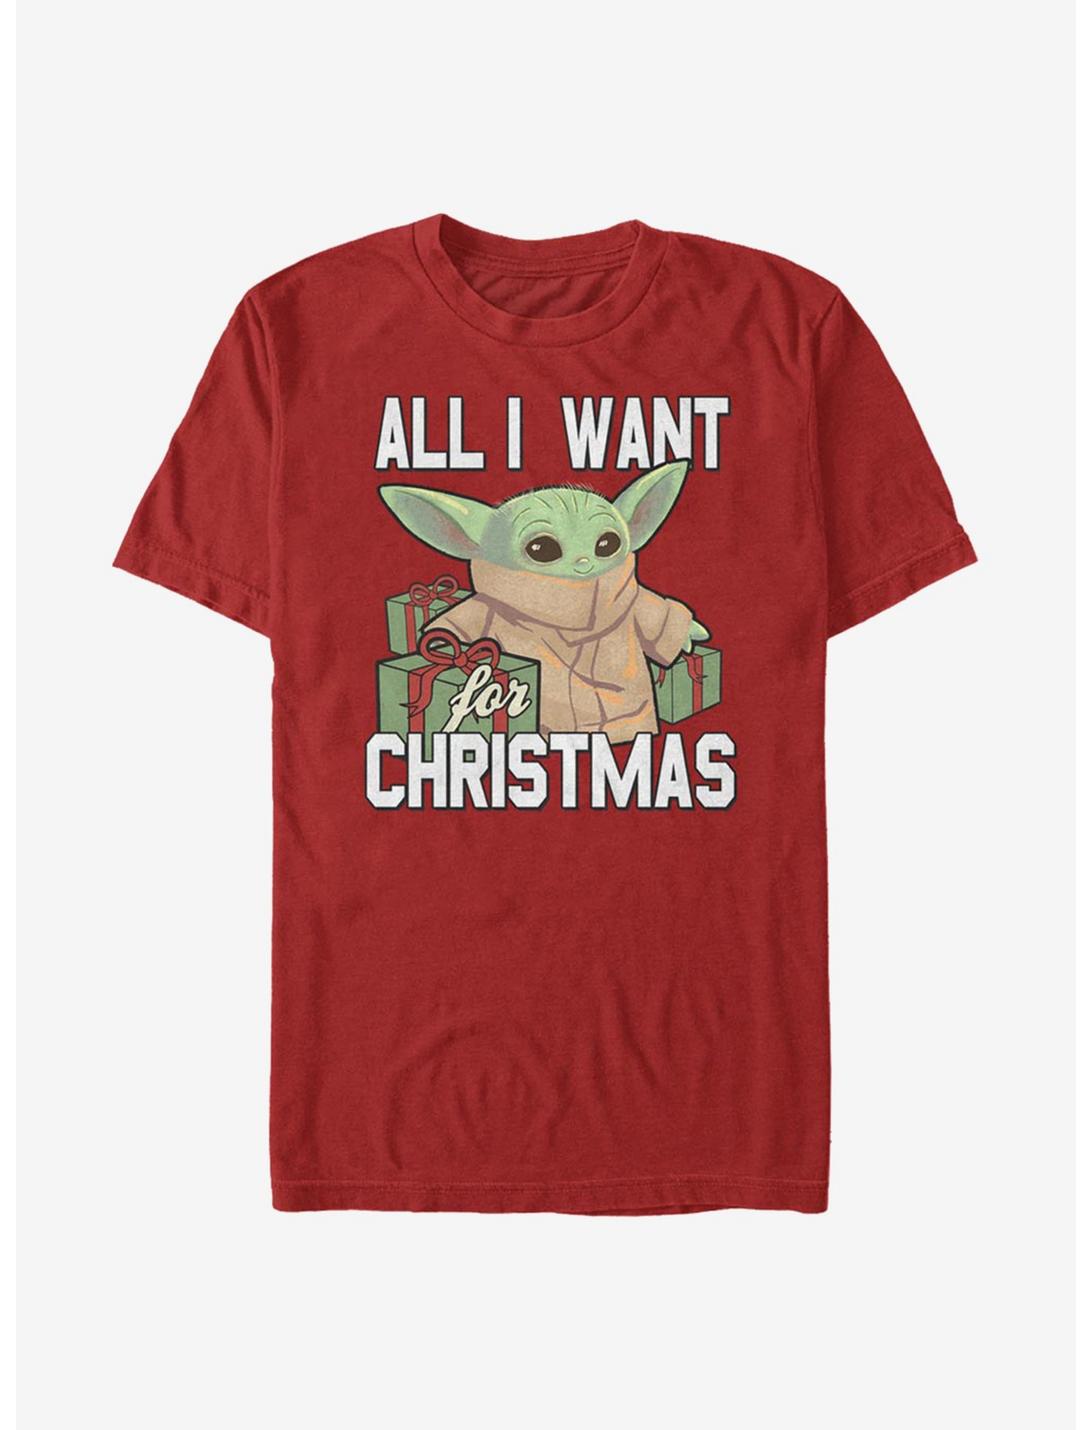 Star Wars The Mandalorian Christmas The Child T-Shirt, RED, hi-res